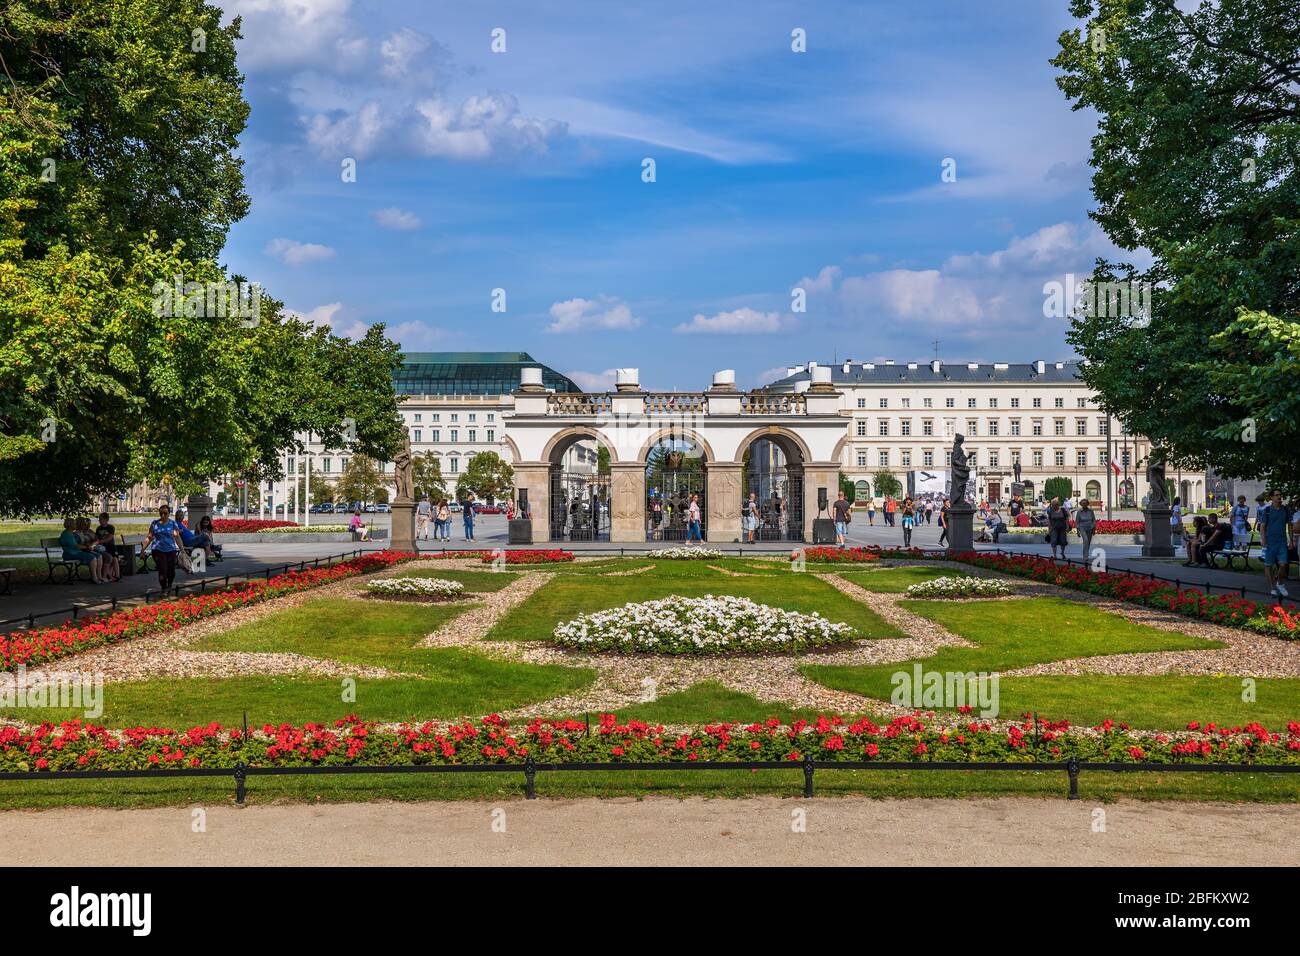 Warsaw, Poland - August 13, 2019: Saxon Garden and Tomb of the Unknown Soldier, city landmarks Stock Photo